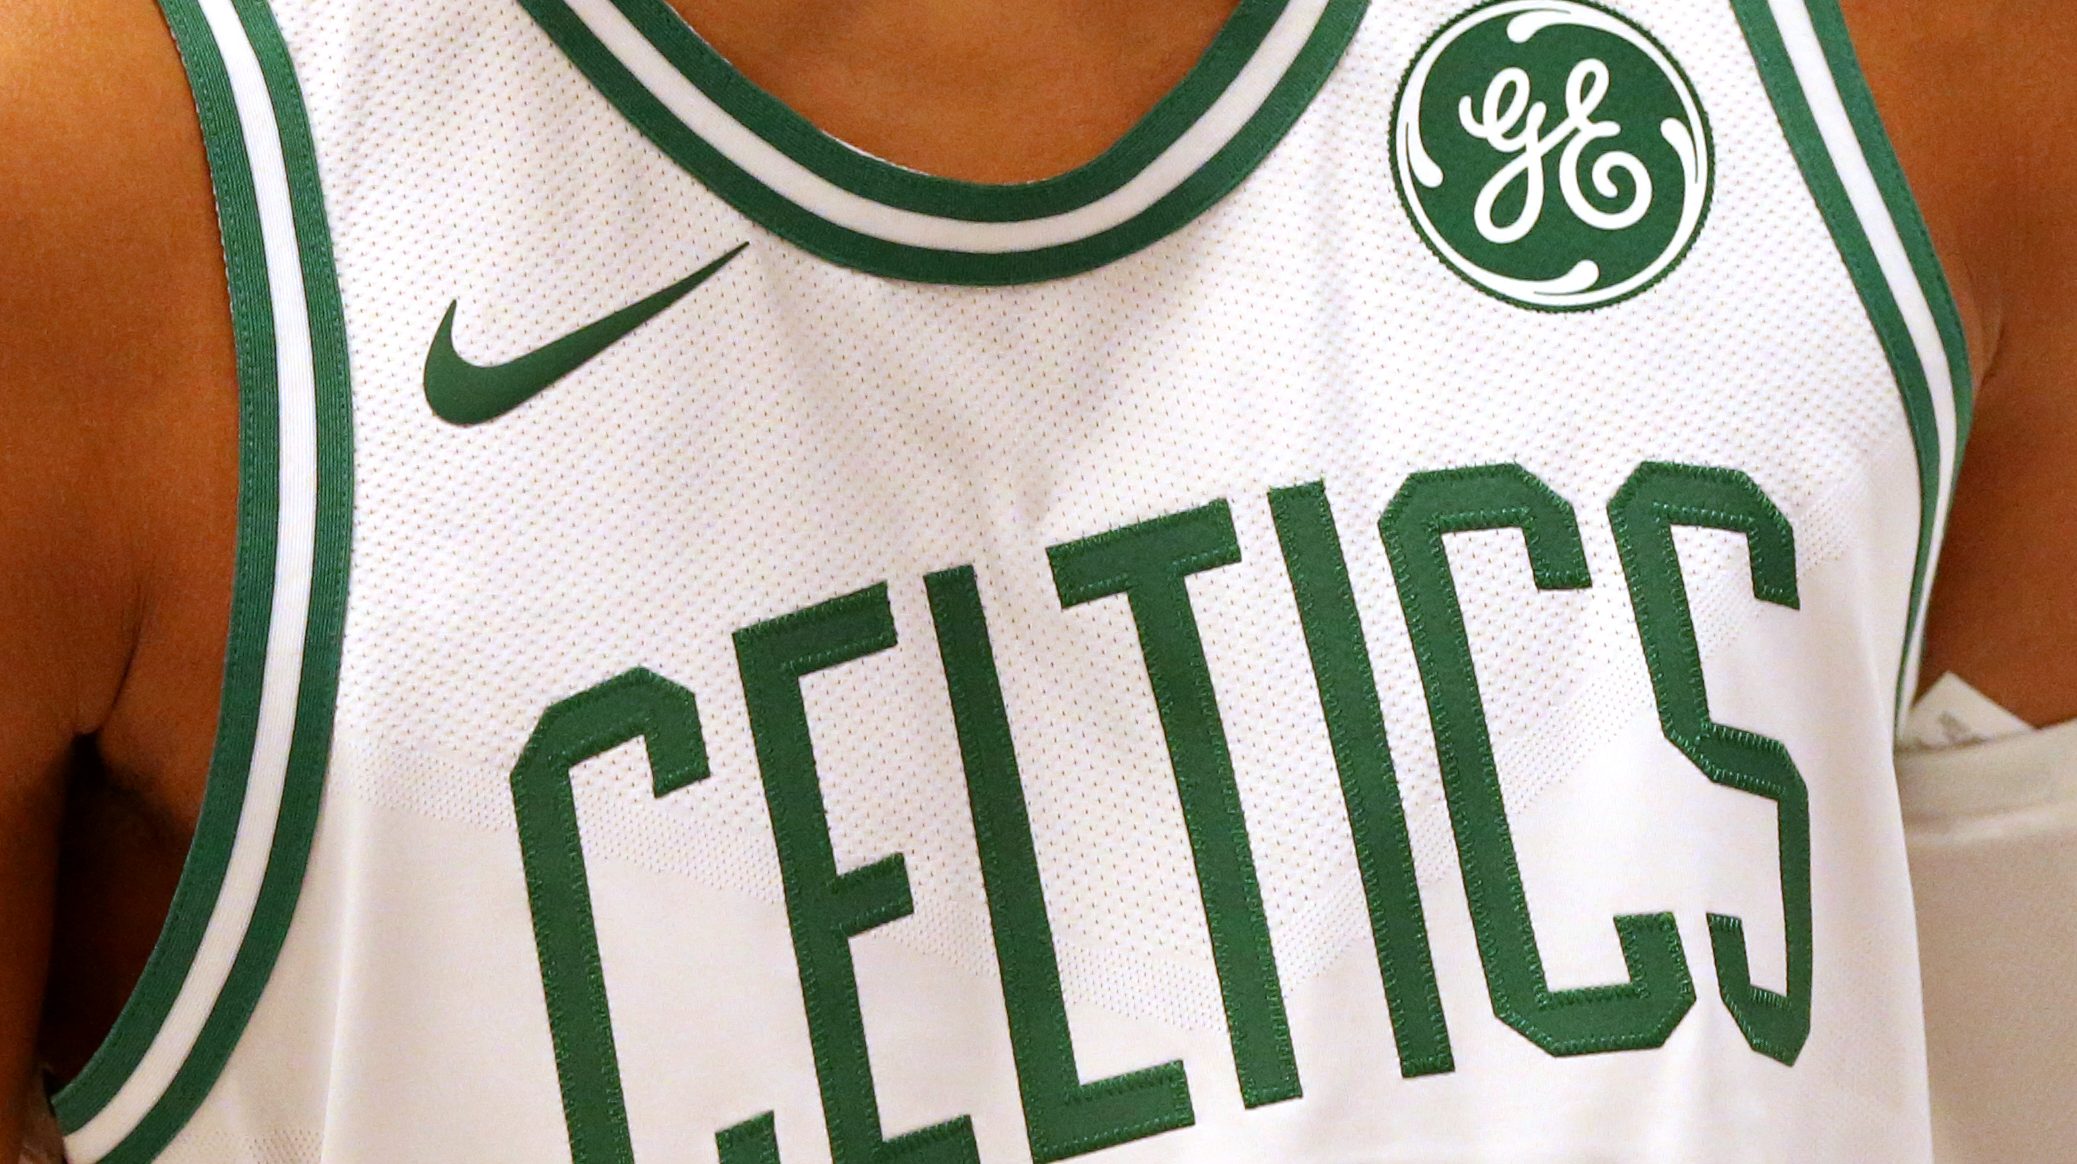 Boston Celtics said to be looking to replace GE logo patch - Boston  Business Journal